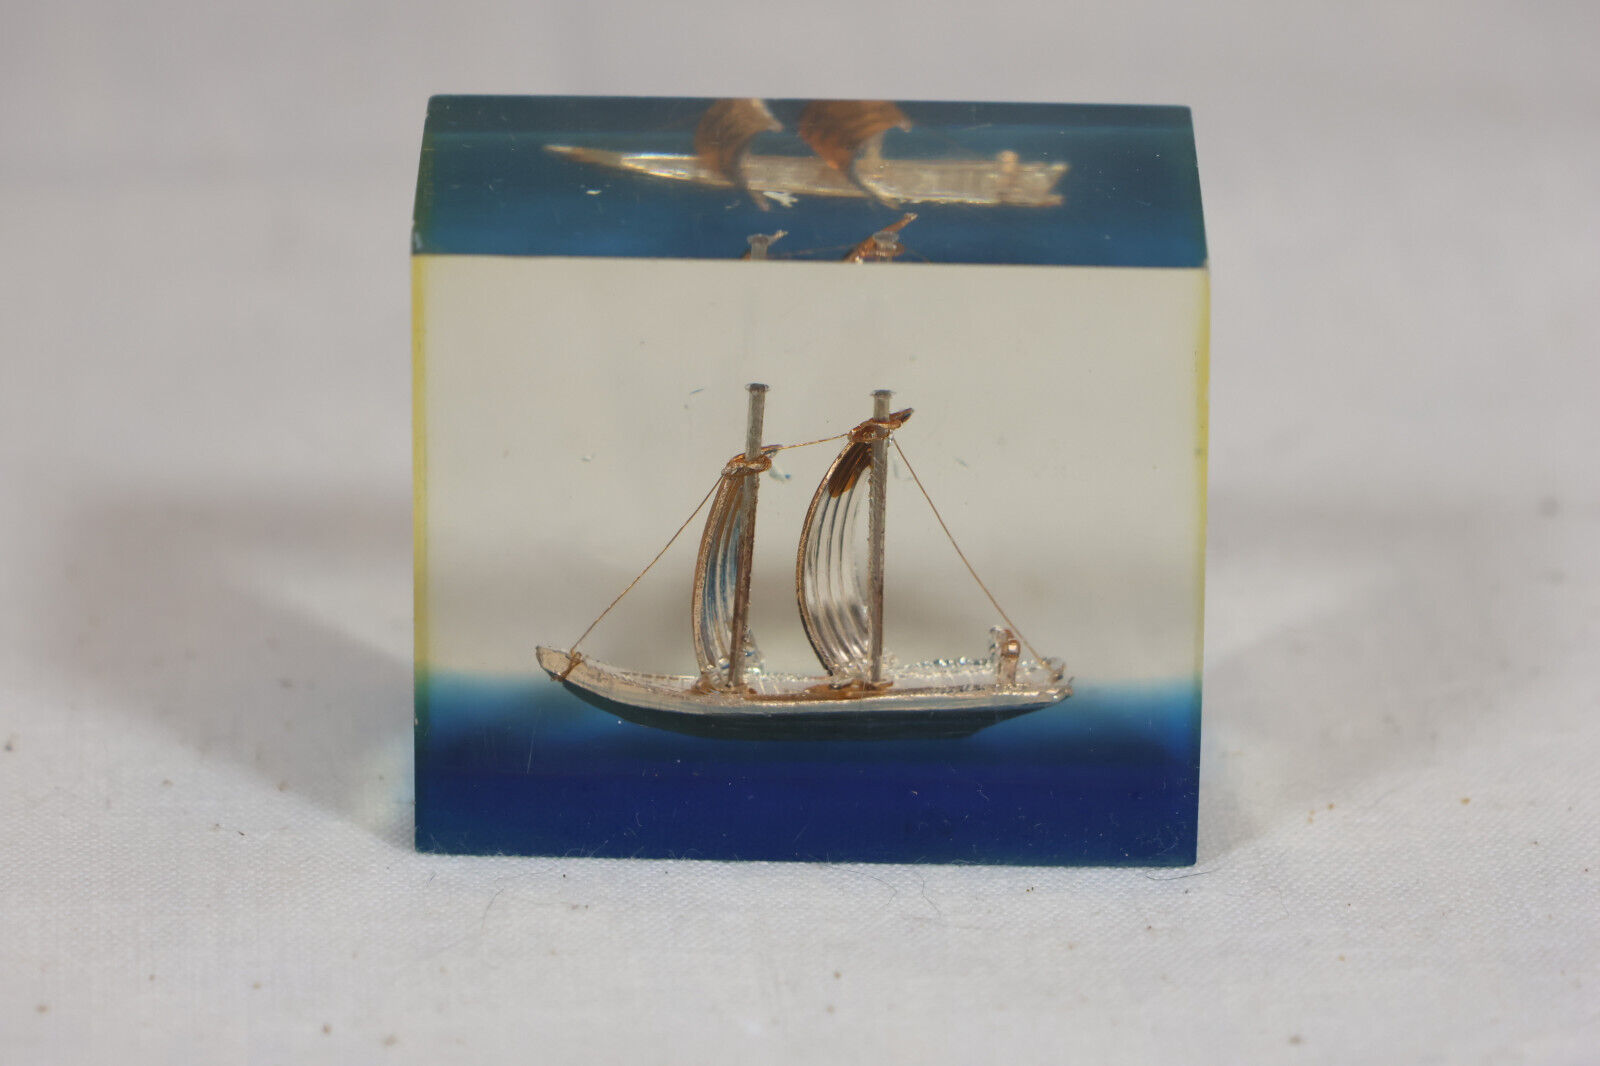 Vintage Miniature Resin Block with sailing ship encased in resin 2 x 1.75 x 1 in